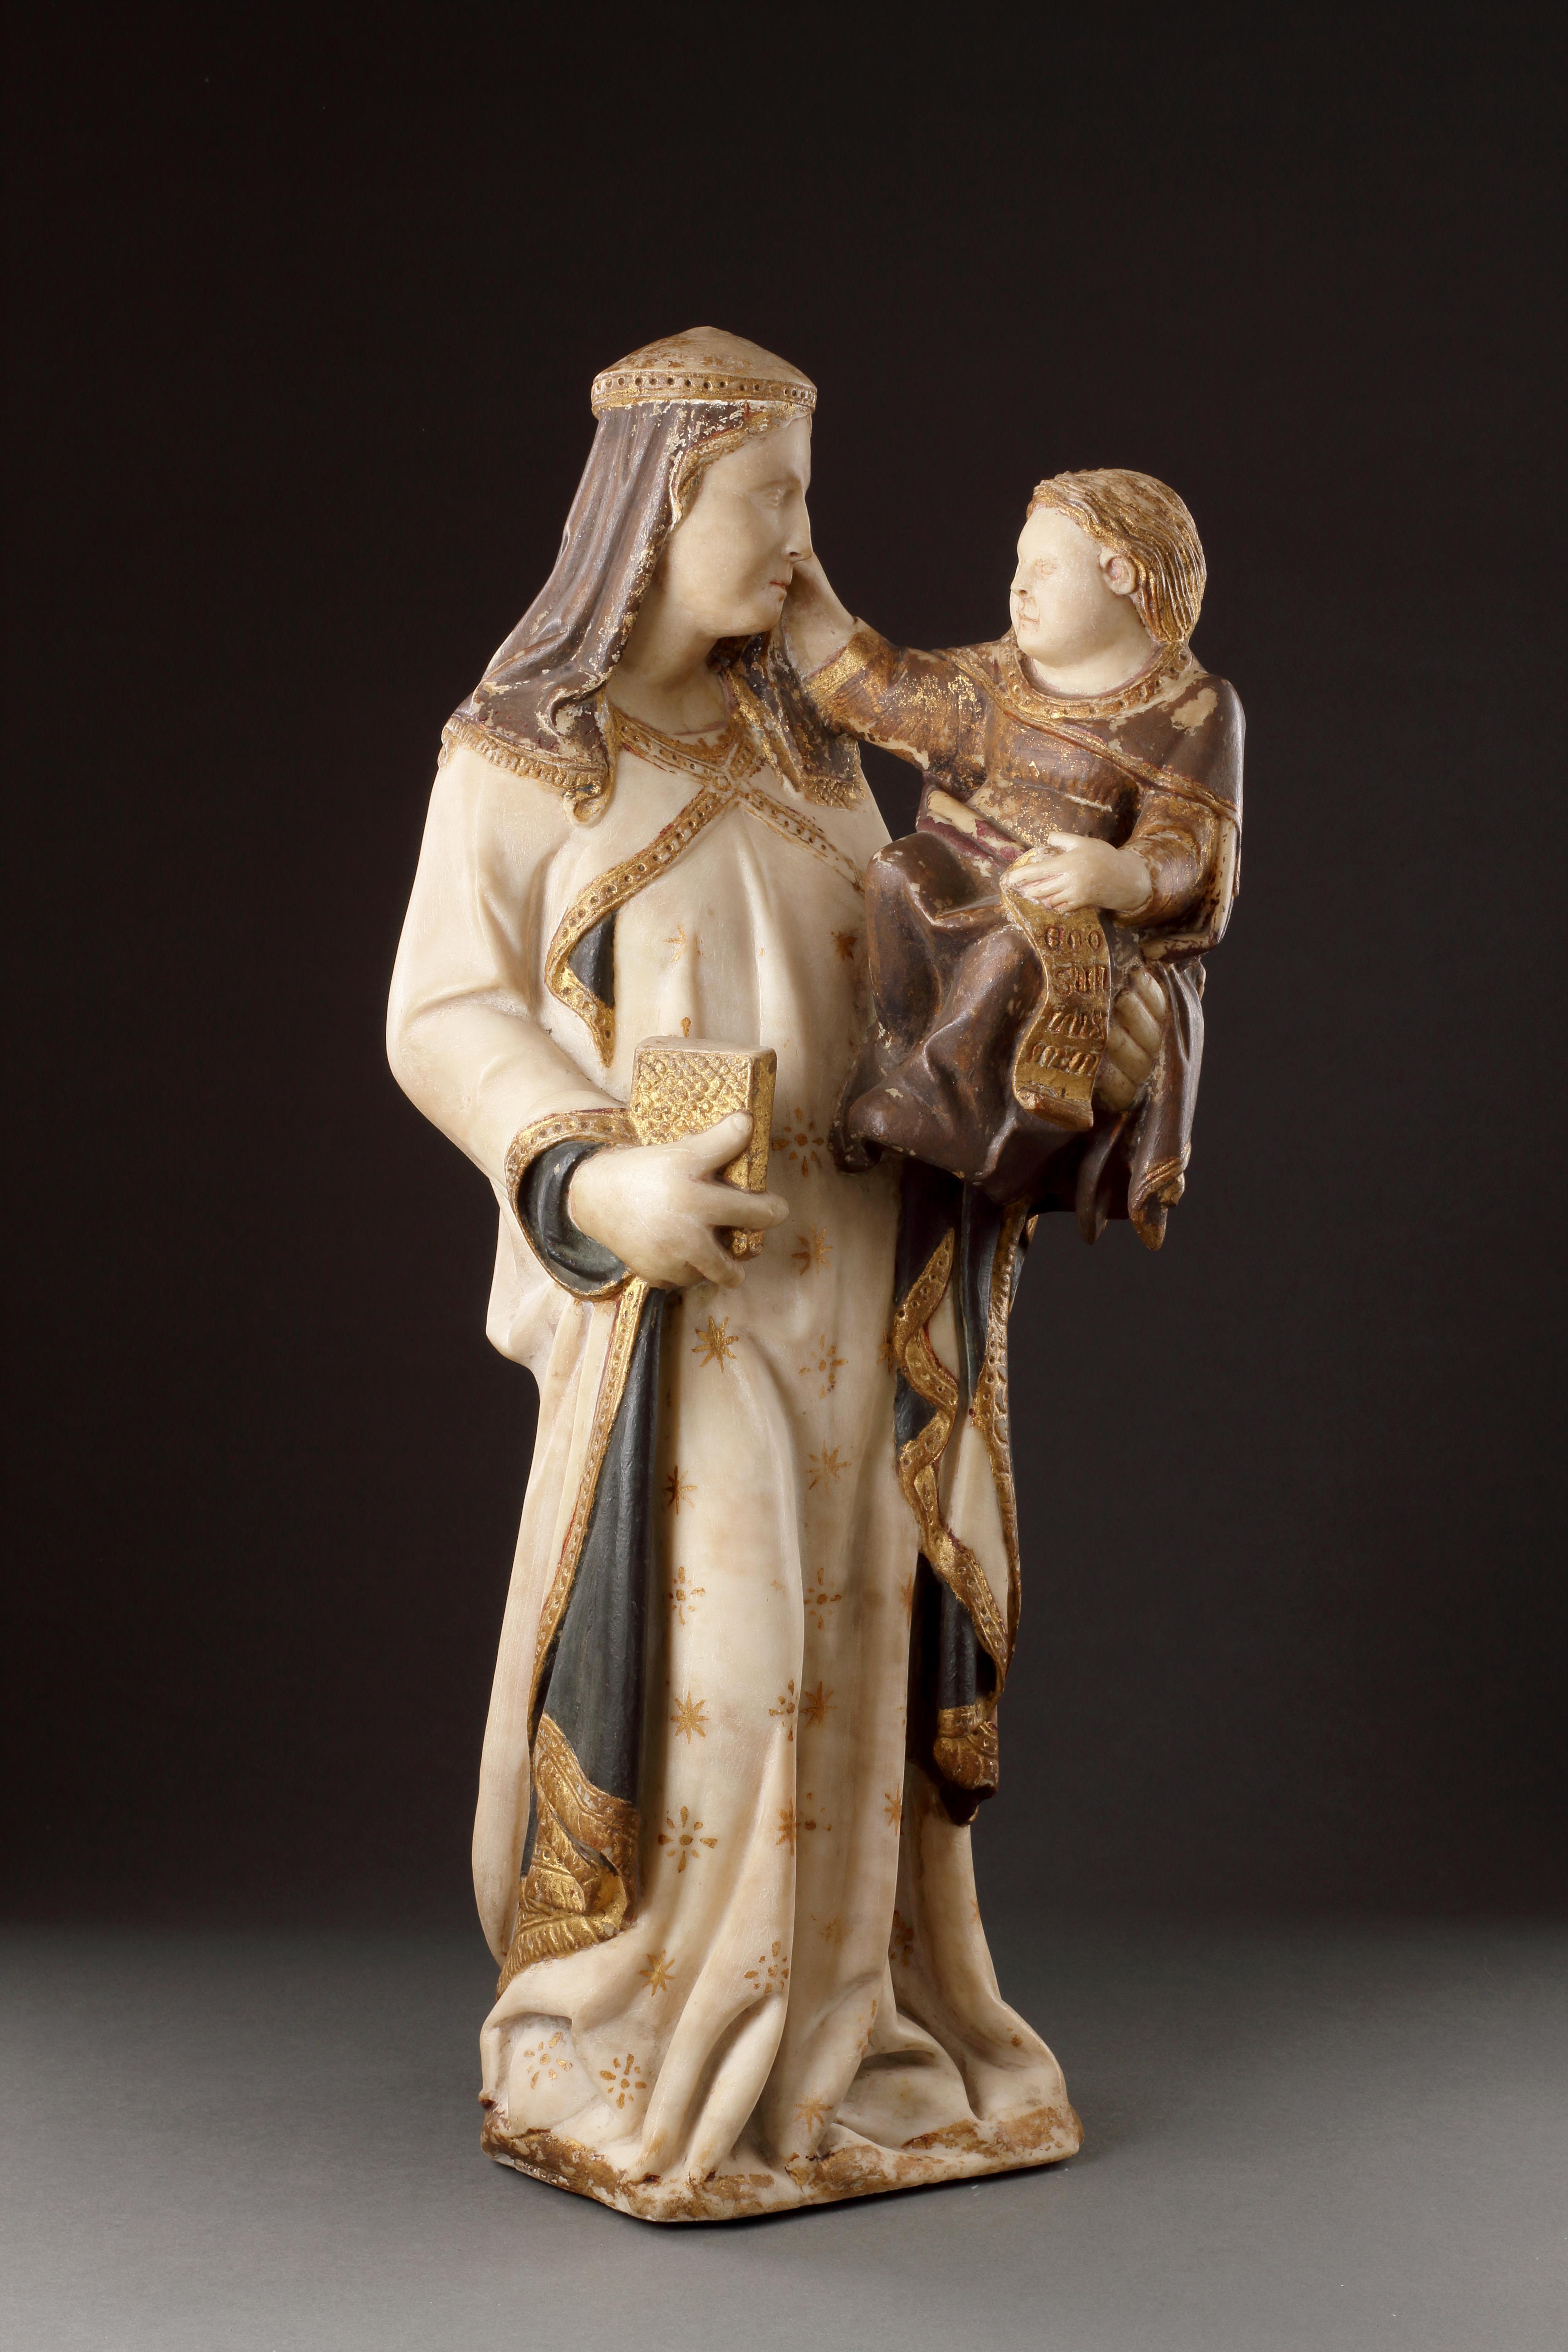 A Polychrome and Parcel-Gilt Marble Group of the Virgin
and Child
Attributed to Giovanni Di Balduccio (1317 - 1349)
Marble
Italy
Circa 1330 - 1340

SIZE: 65cm high, 28cm wide - 25½ ins high, 11 ins wide 

PROVENANCE:
Possibly Trivolzio Collection,